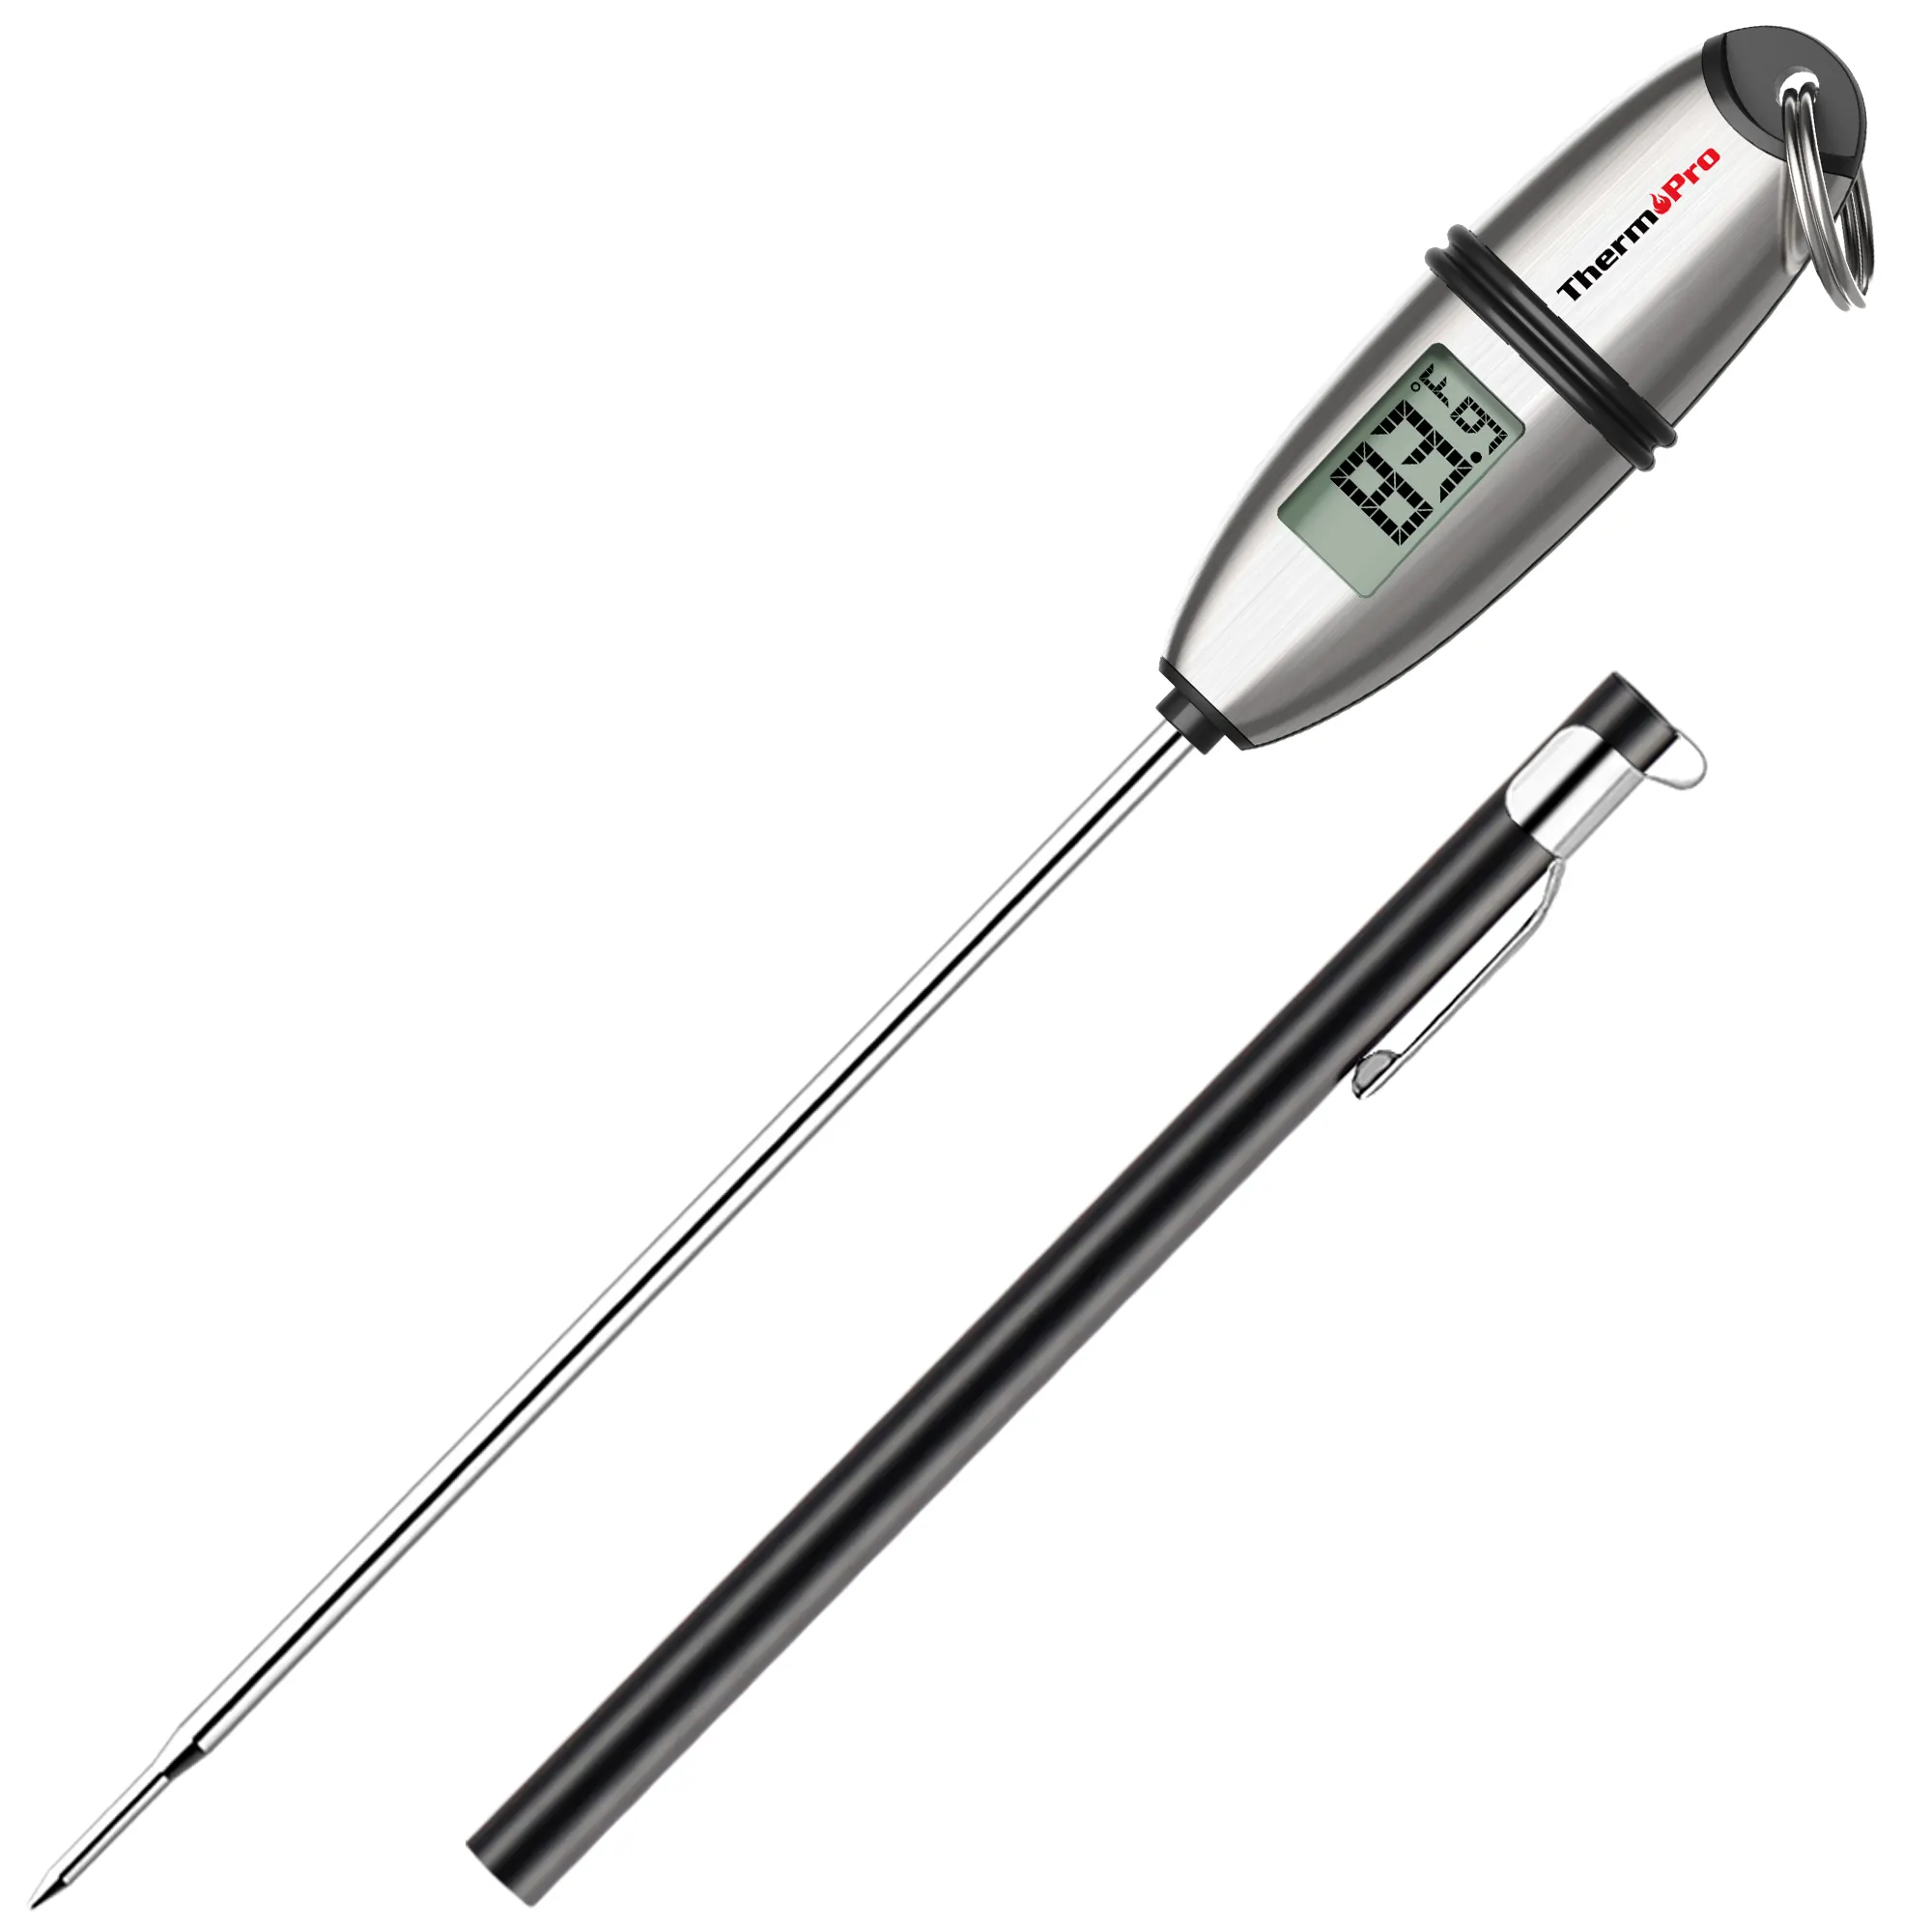 Mini ThermoPro TP02S Professional Digital Kitchen Thermometers with Display for Cooking